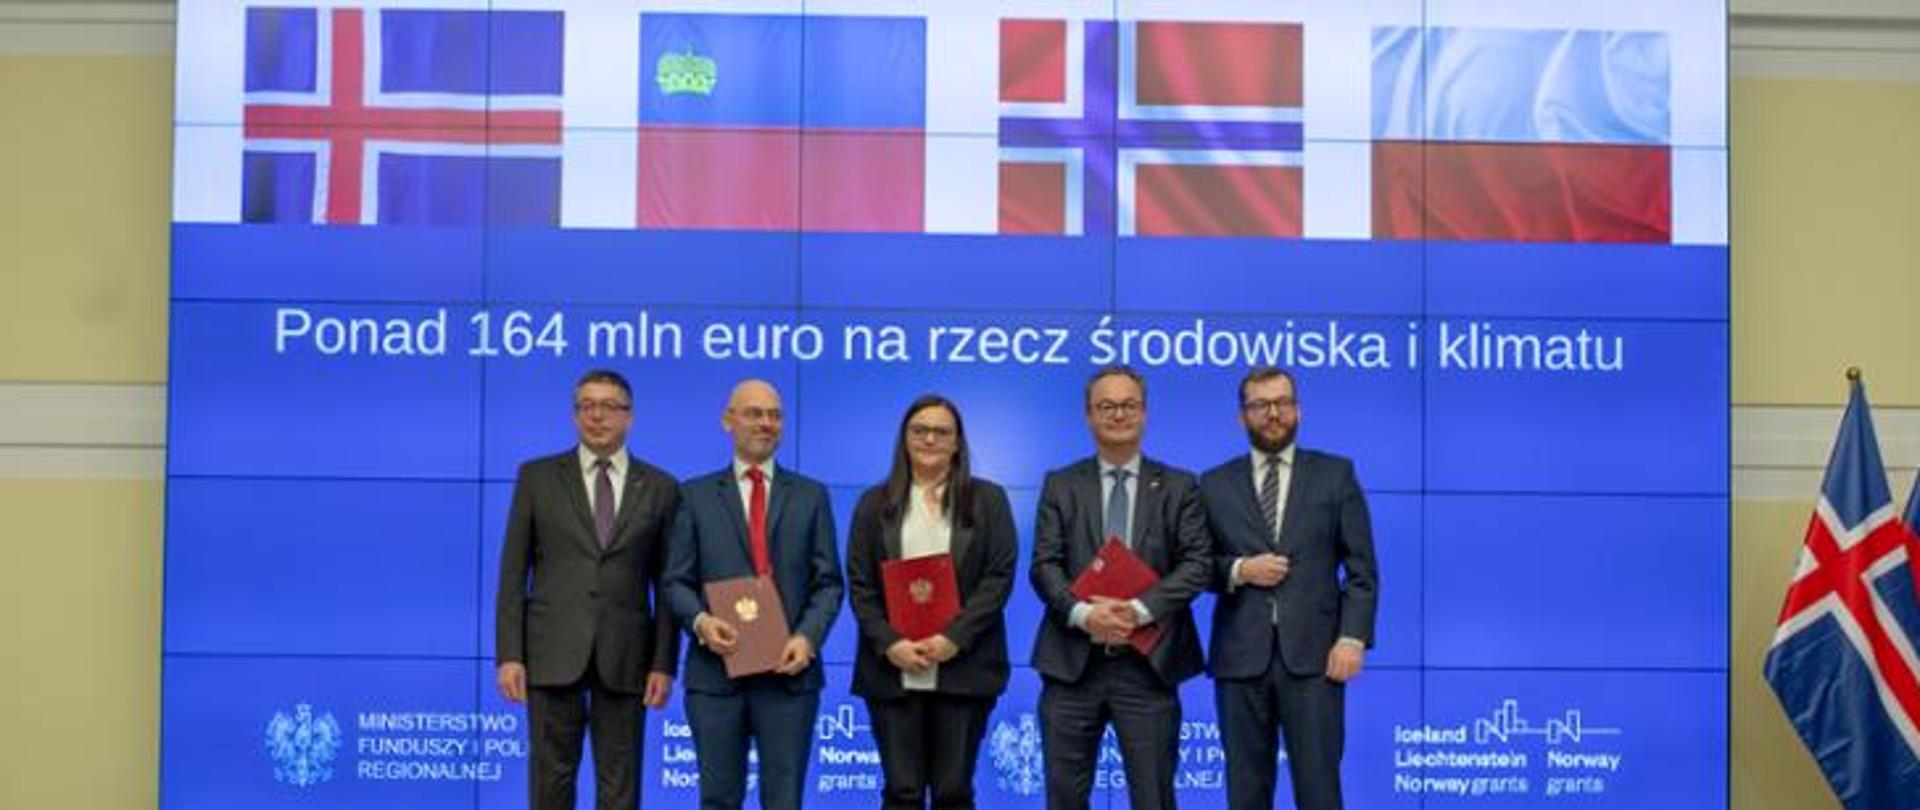 Photo with signed contracts, among them there is minister Jarosińska-Jedynak, ambassador of Norway to Poland Olav Mykelbust, minister Kurtyka and minister Puda. Behind them is the inscription over EUR 164 million for the environment and climate